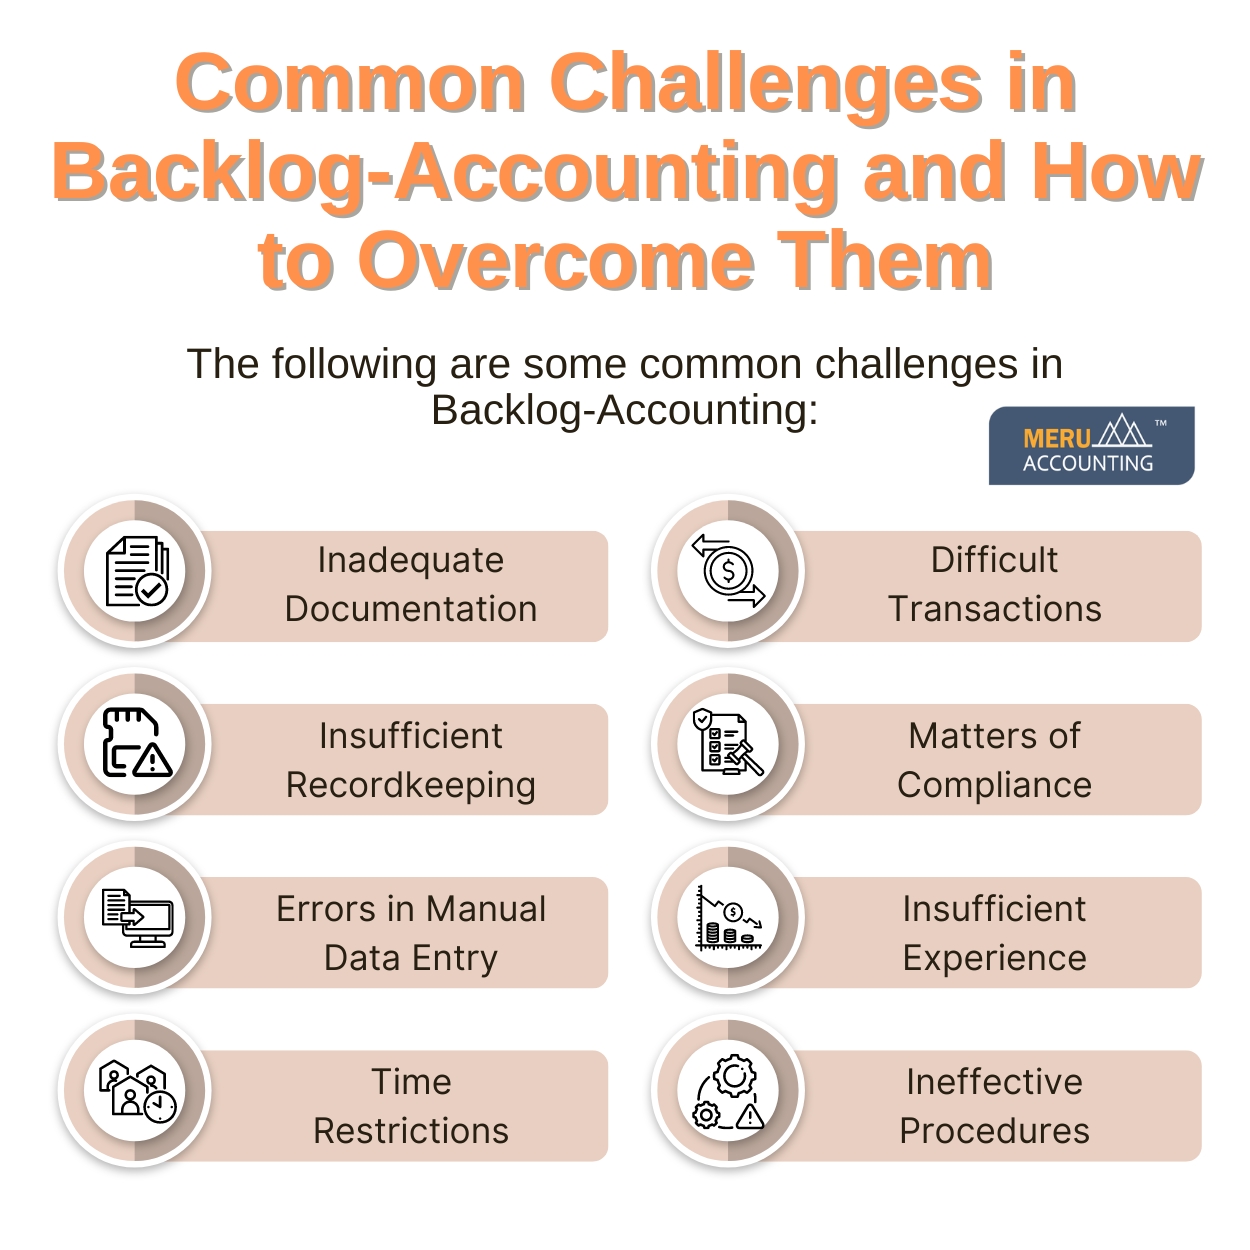 Common Challenges in Backlog Accounting and How to Overcome Them 1250 by 1250 v1